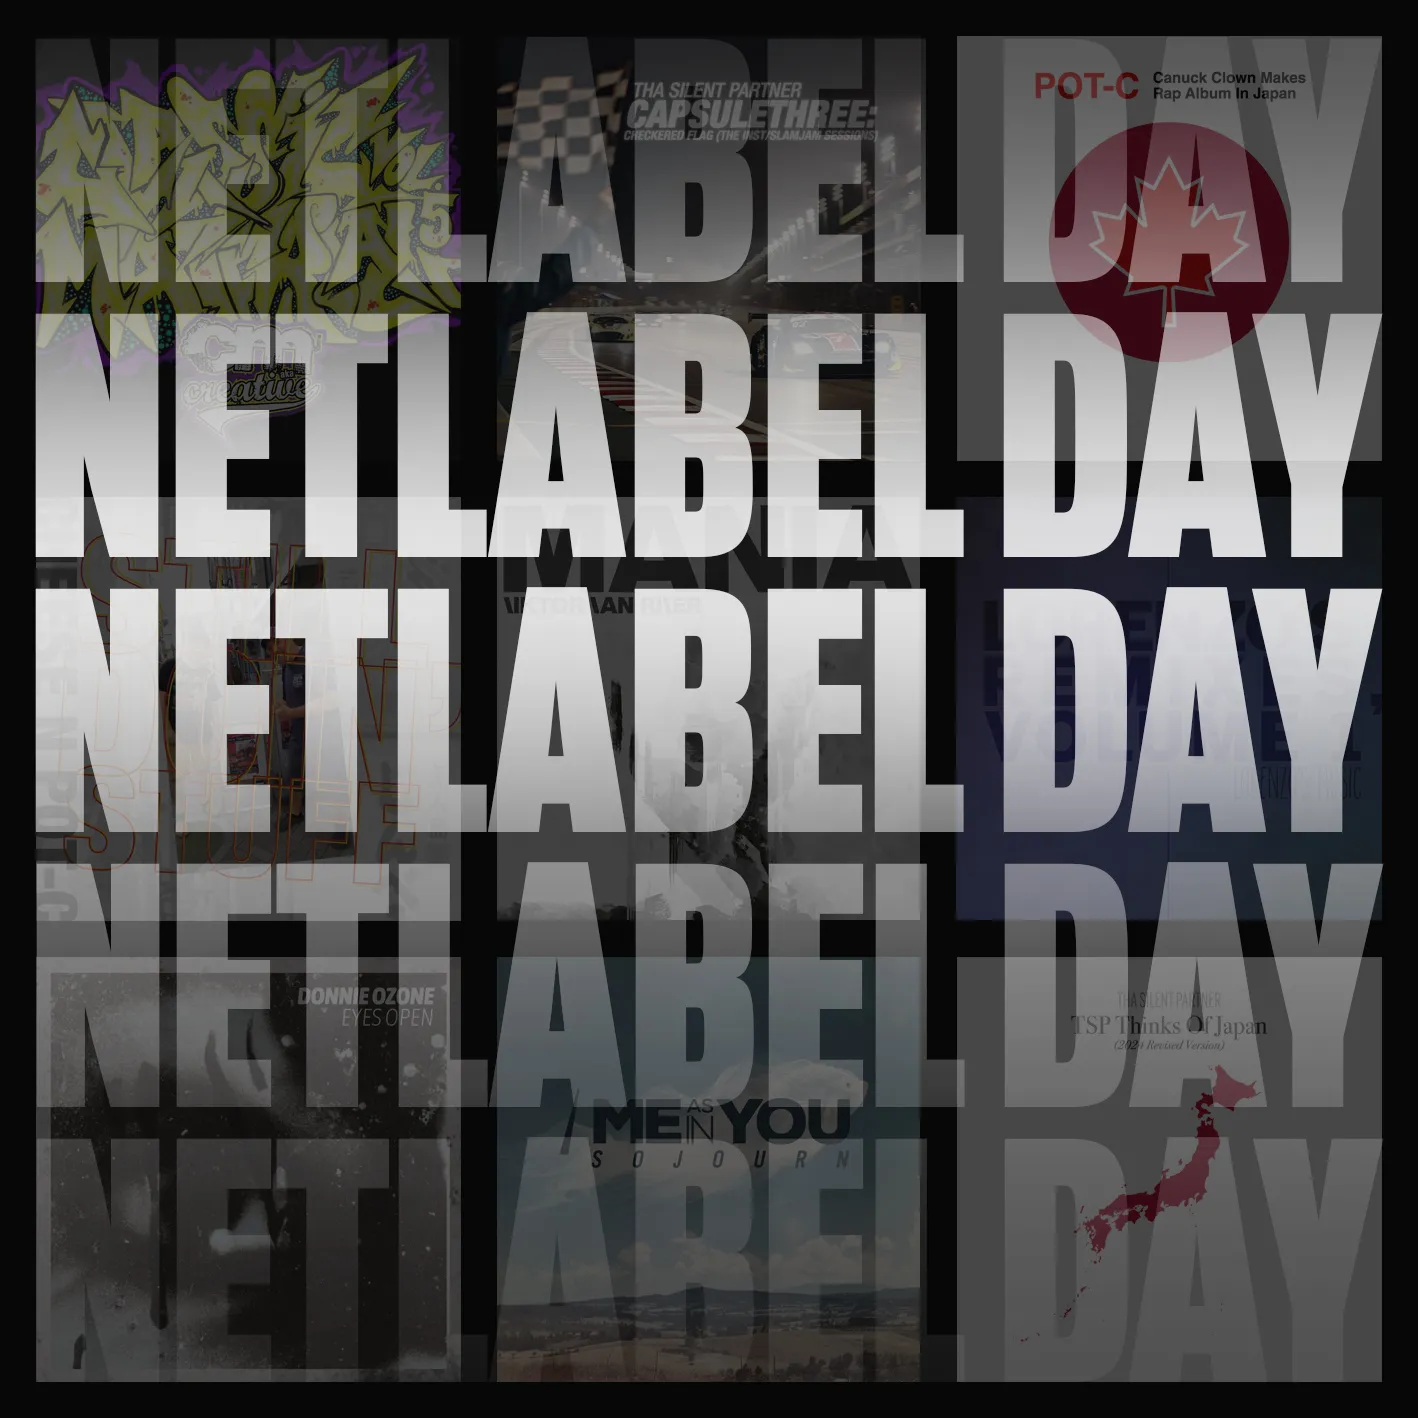 Image for article “Netlabel Day Arrives! A Day to Celebrate the Culture!” displaying the words Netlabel Day overlayed on a selection of release cover art